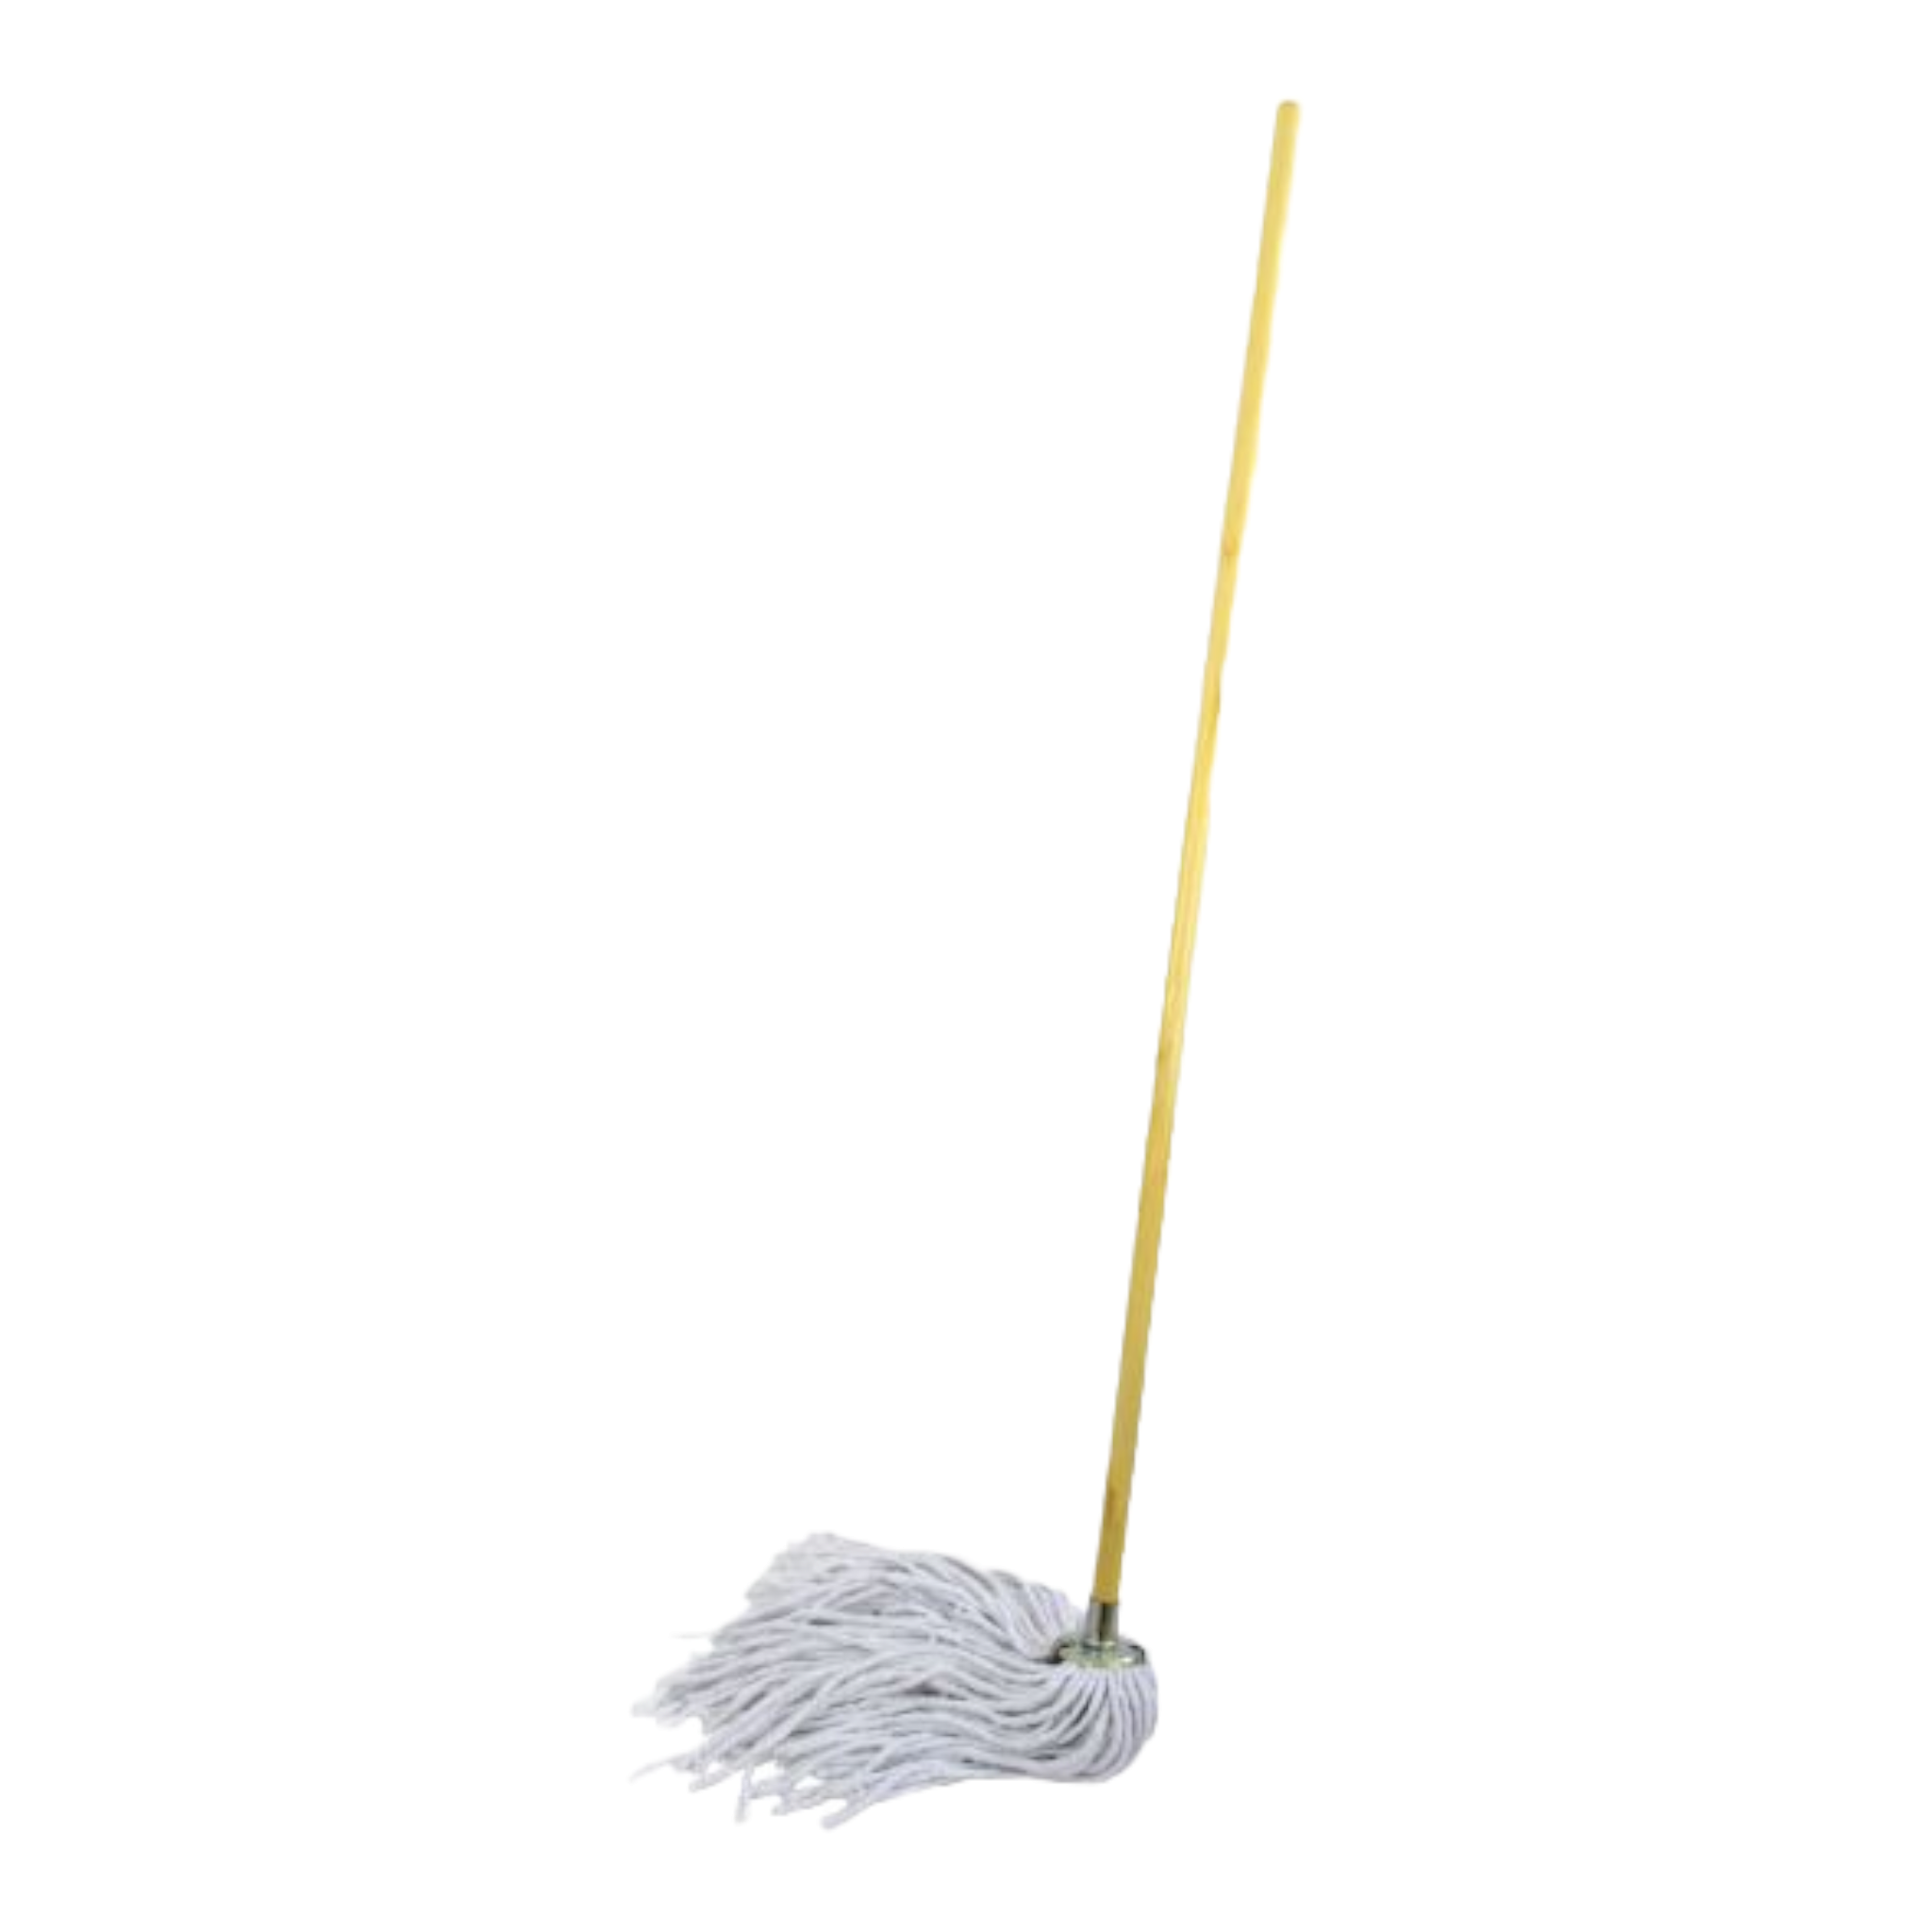 Wet Mop Long Hair with Wooden Handle F17590 Academy